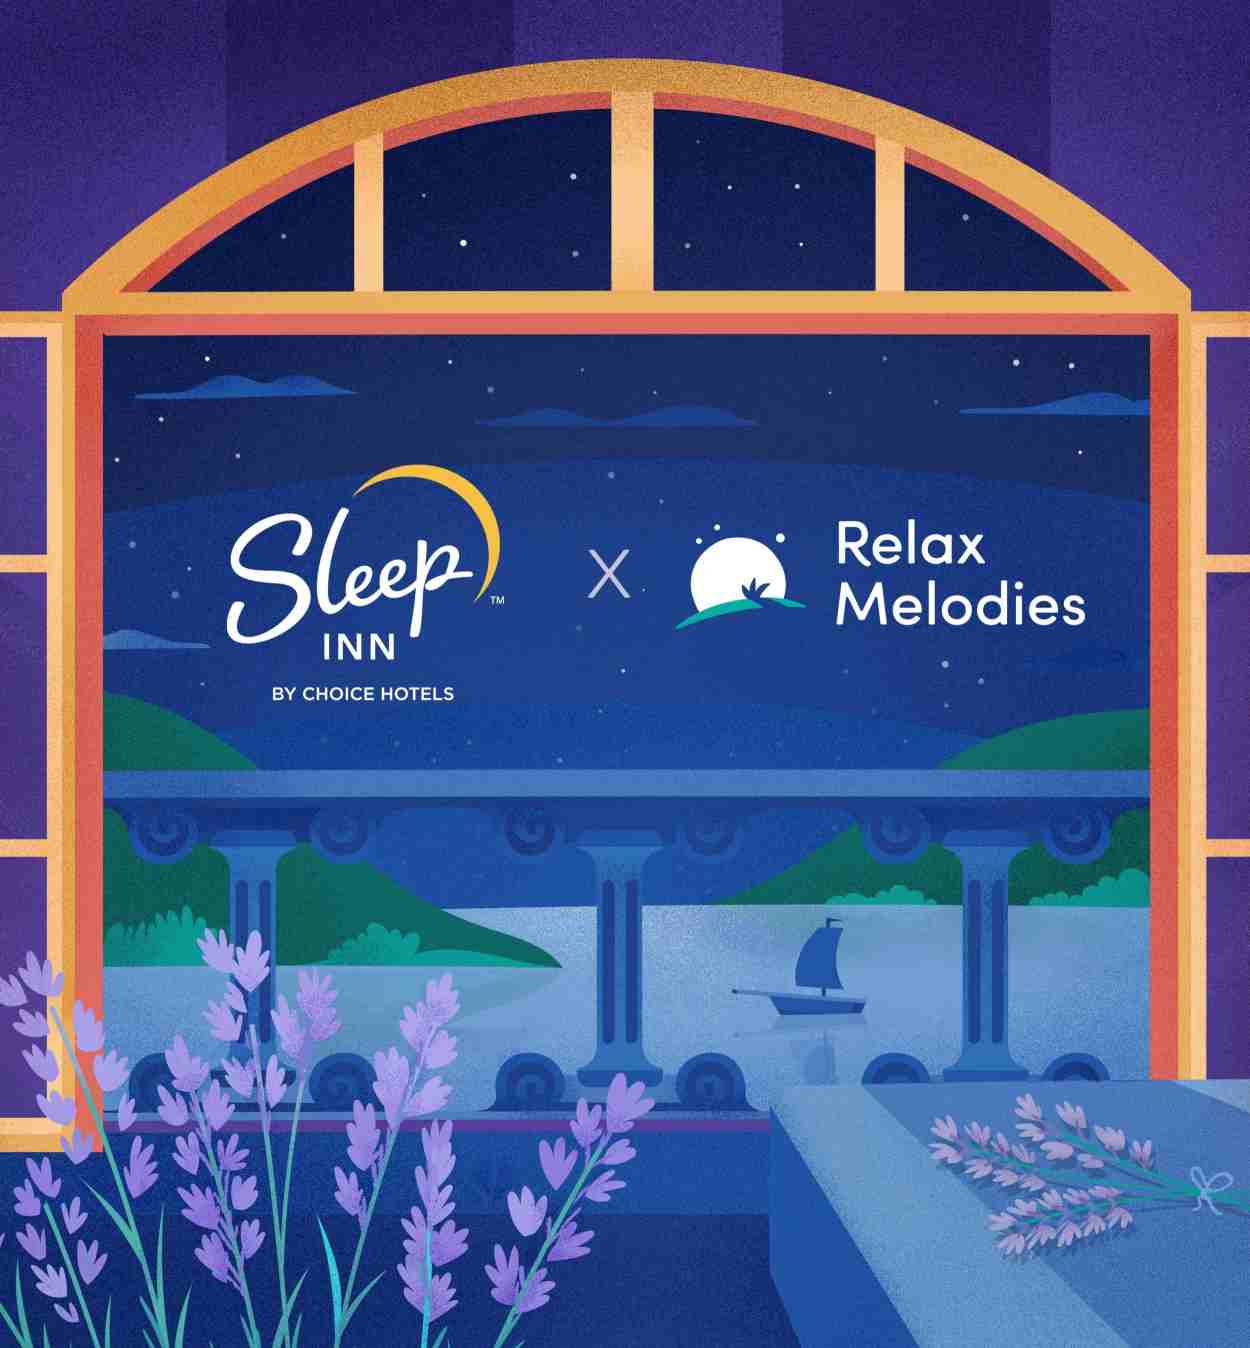 Sleep Inn Partners with Relax Melodies